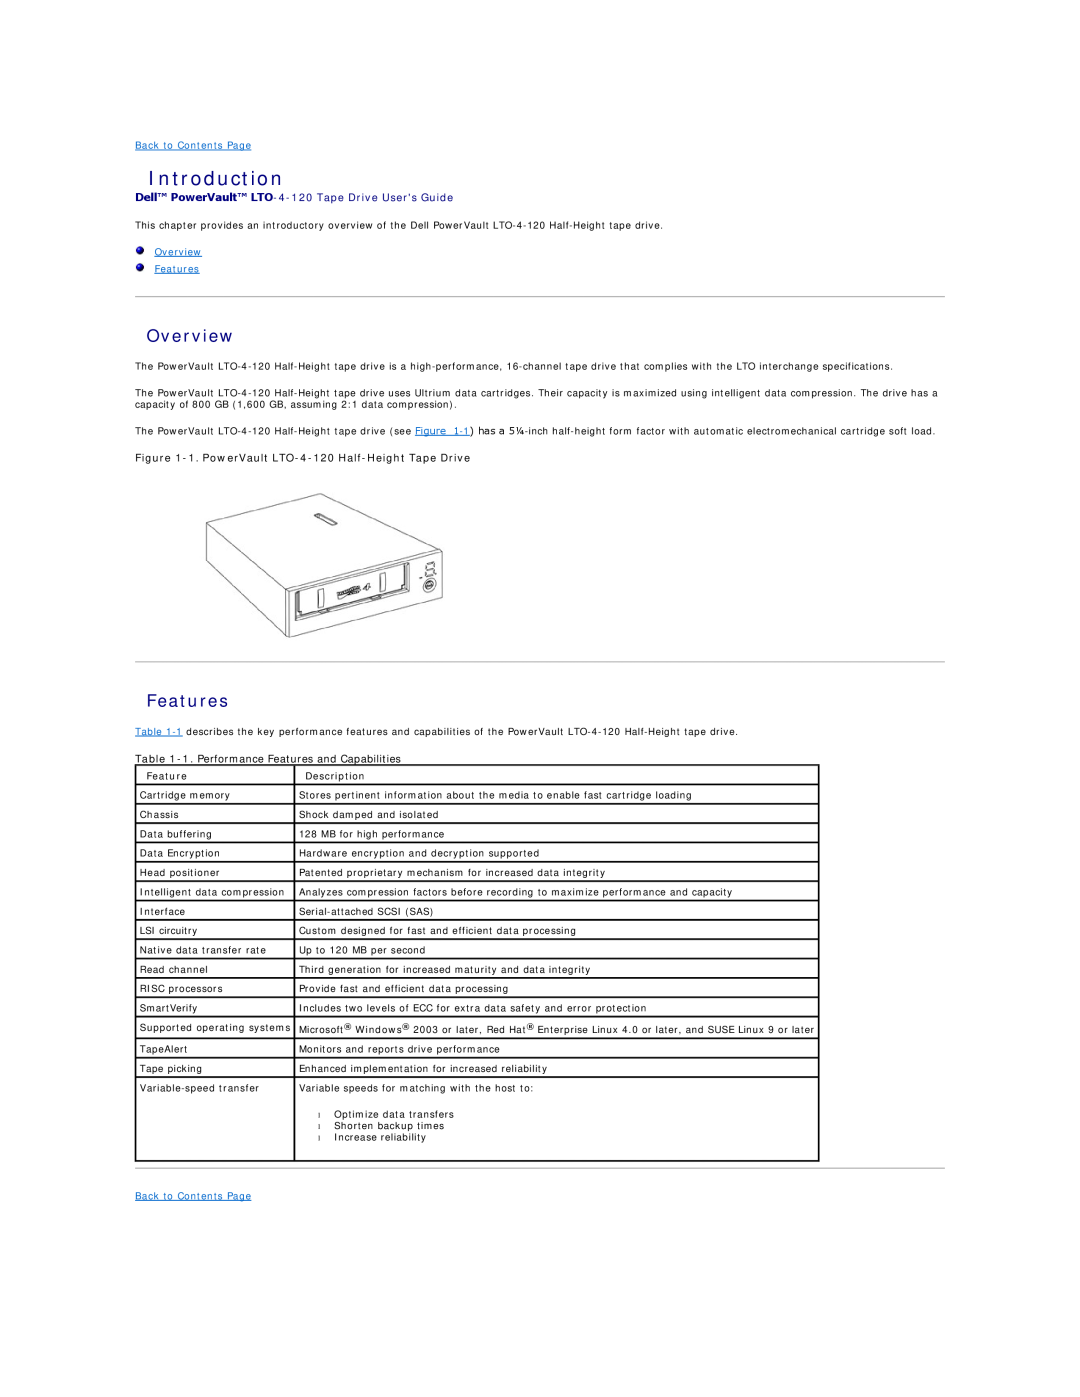 Dell 0TK131 Rev. A01 Introduction, Dell PowerVault LTO-4-120 Tape Drive Users Guide, Overview Features 